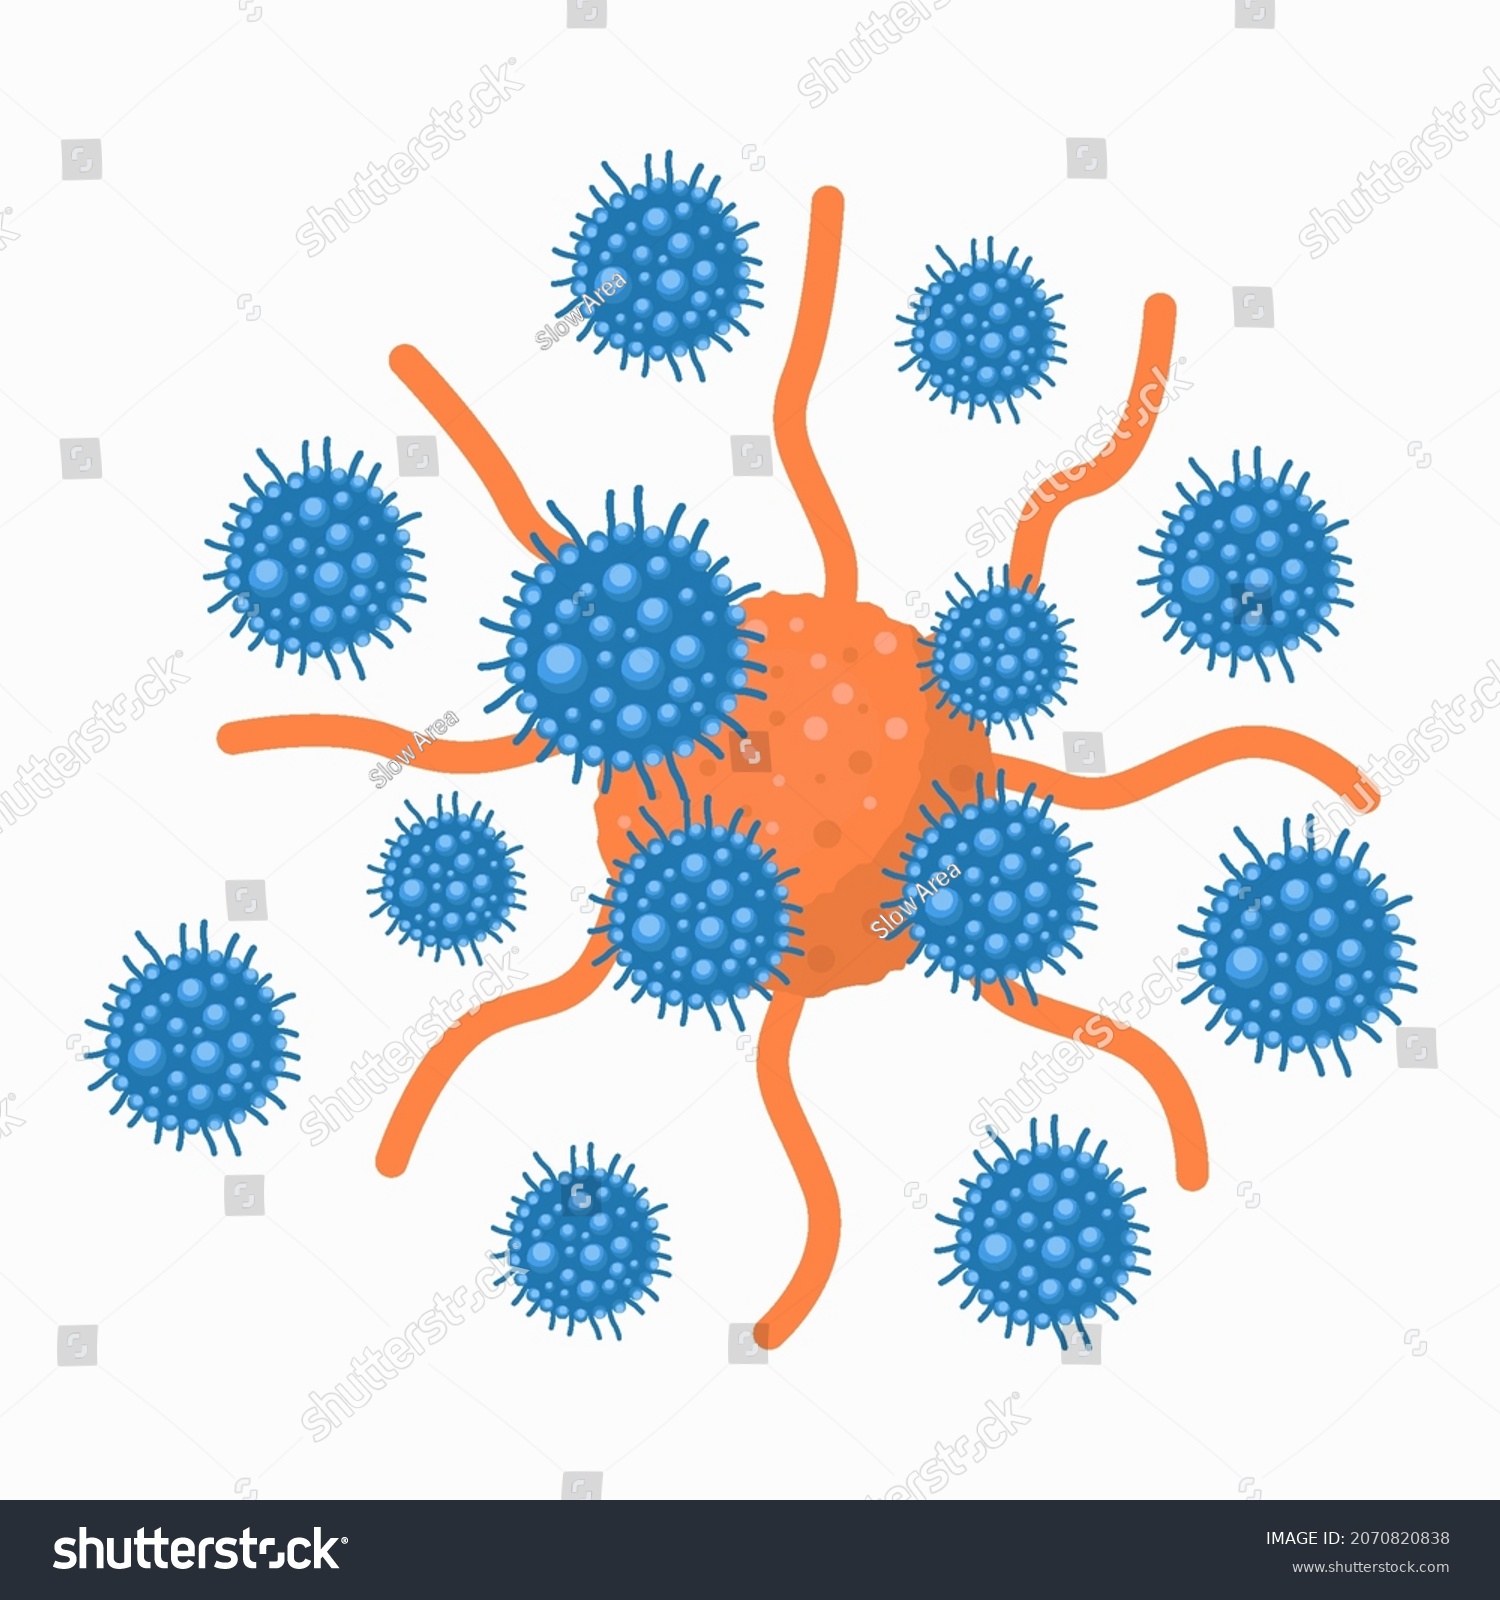 illustrator cell download t cell